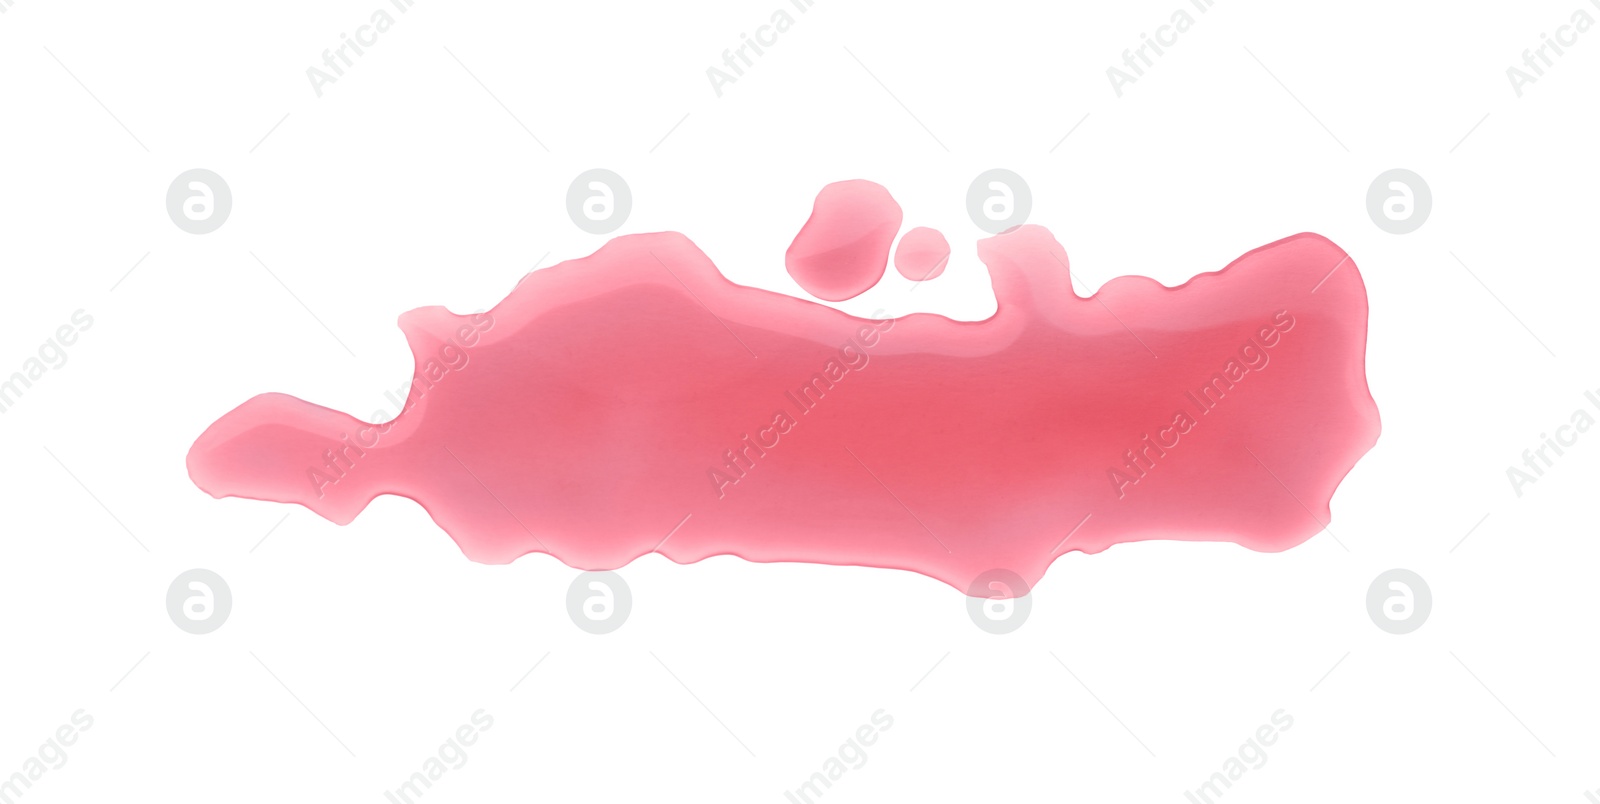 Photo of Puddle of red liquid on white background, top view